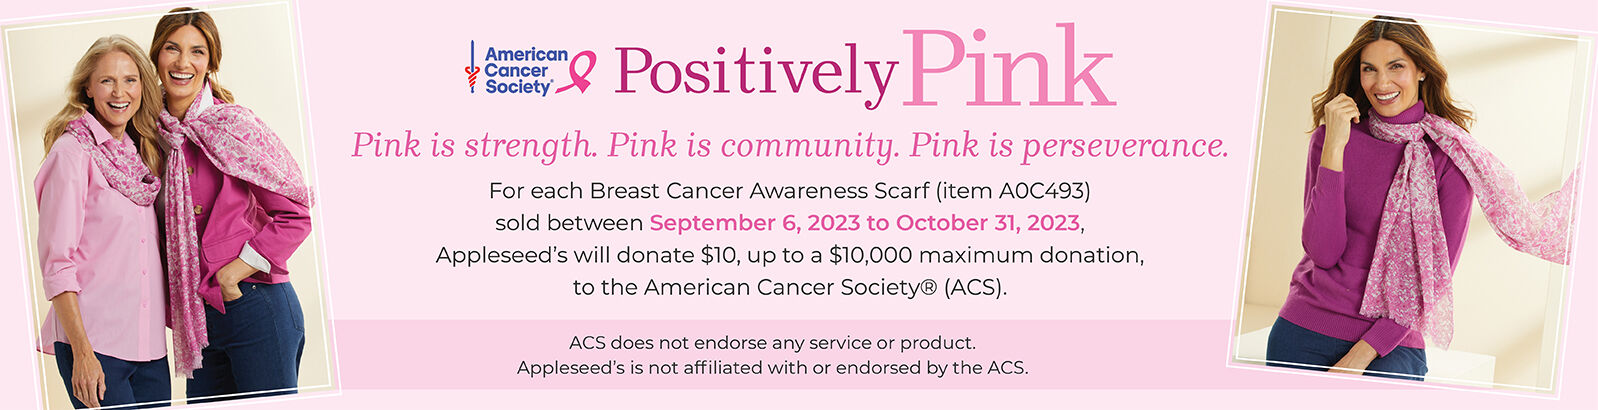 American Cancer Society Postively Pink Pink is strength. Pink is community. Pink is perserverence. For each Breast Cancer Awareness Scarf (item A0C493) sold between September 6, 2023 to Octber 31, 2023, Appleseed's will donate $10, up to a $10,000 maximum donation, to the American Cancer Society (ACS). ACS does not endorse any service or product. Appleseed's is not affiliated with or endorsed by the ACS.